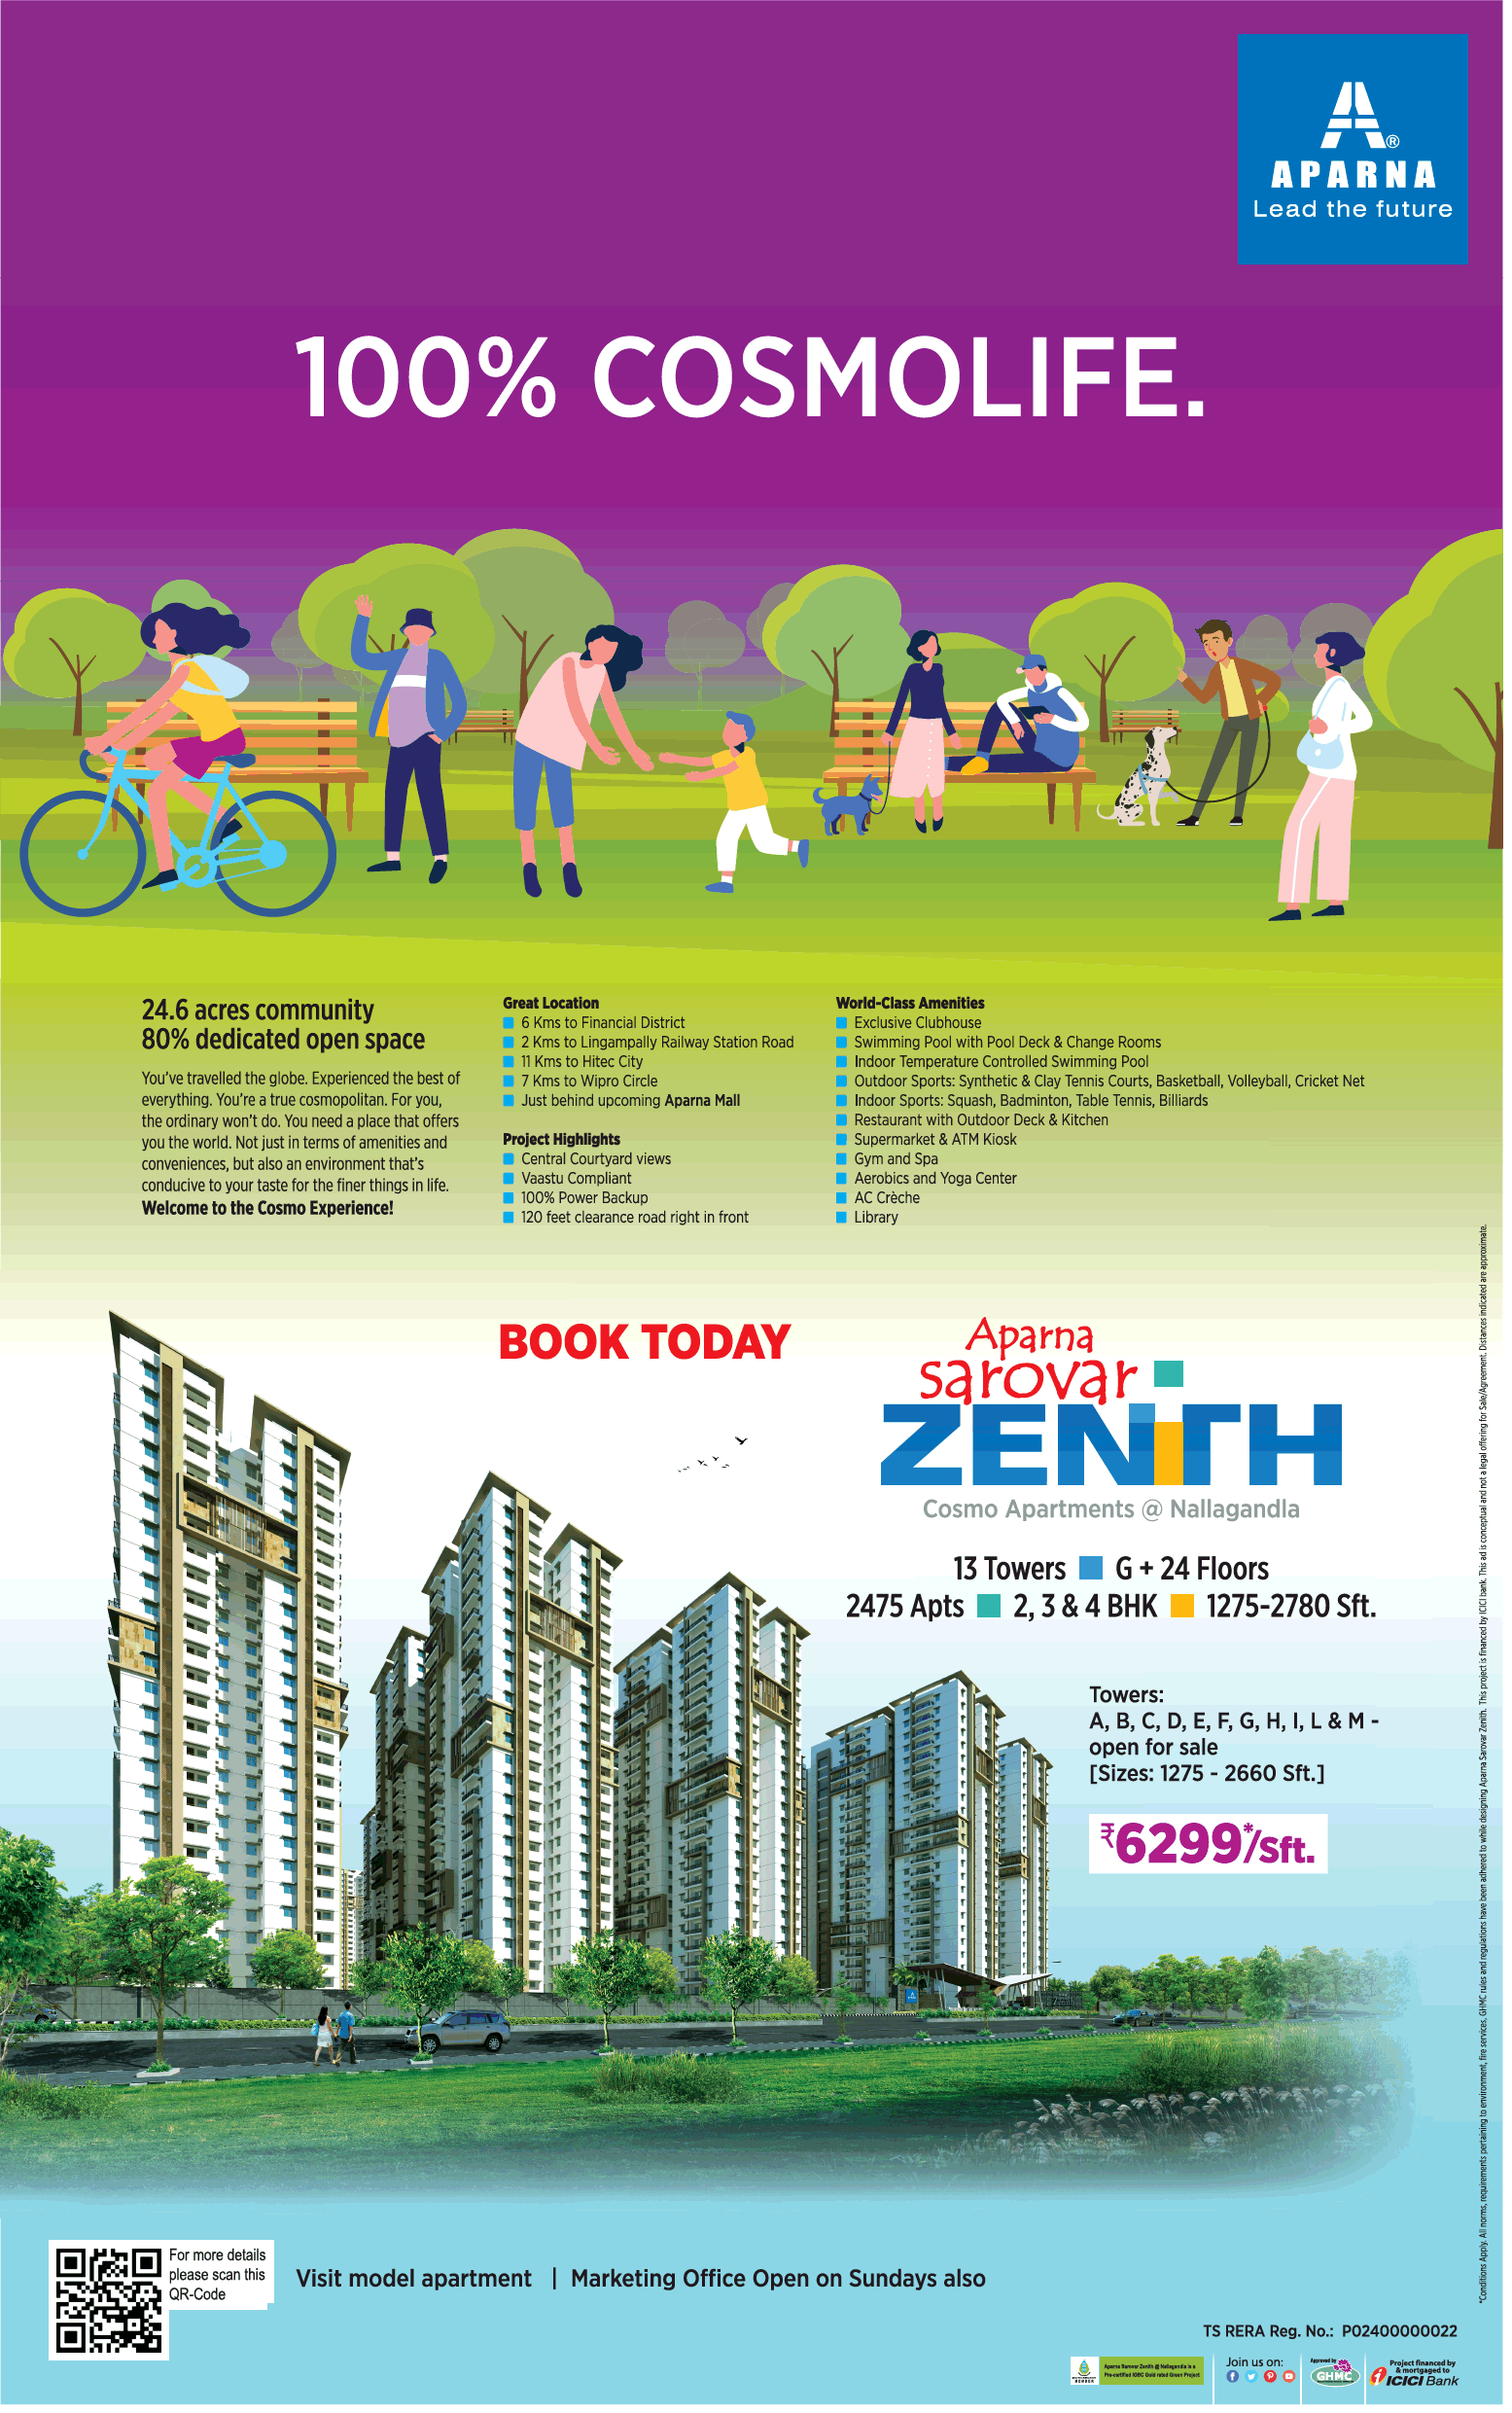 Book your home Rs 6299 per sqft at Aparna Sarovar Zenith in Hyderabad